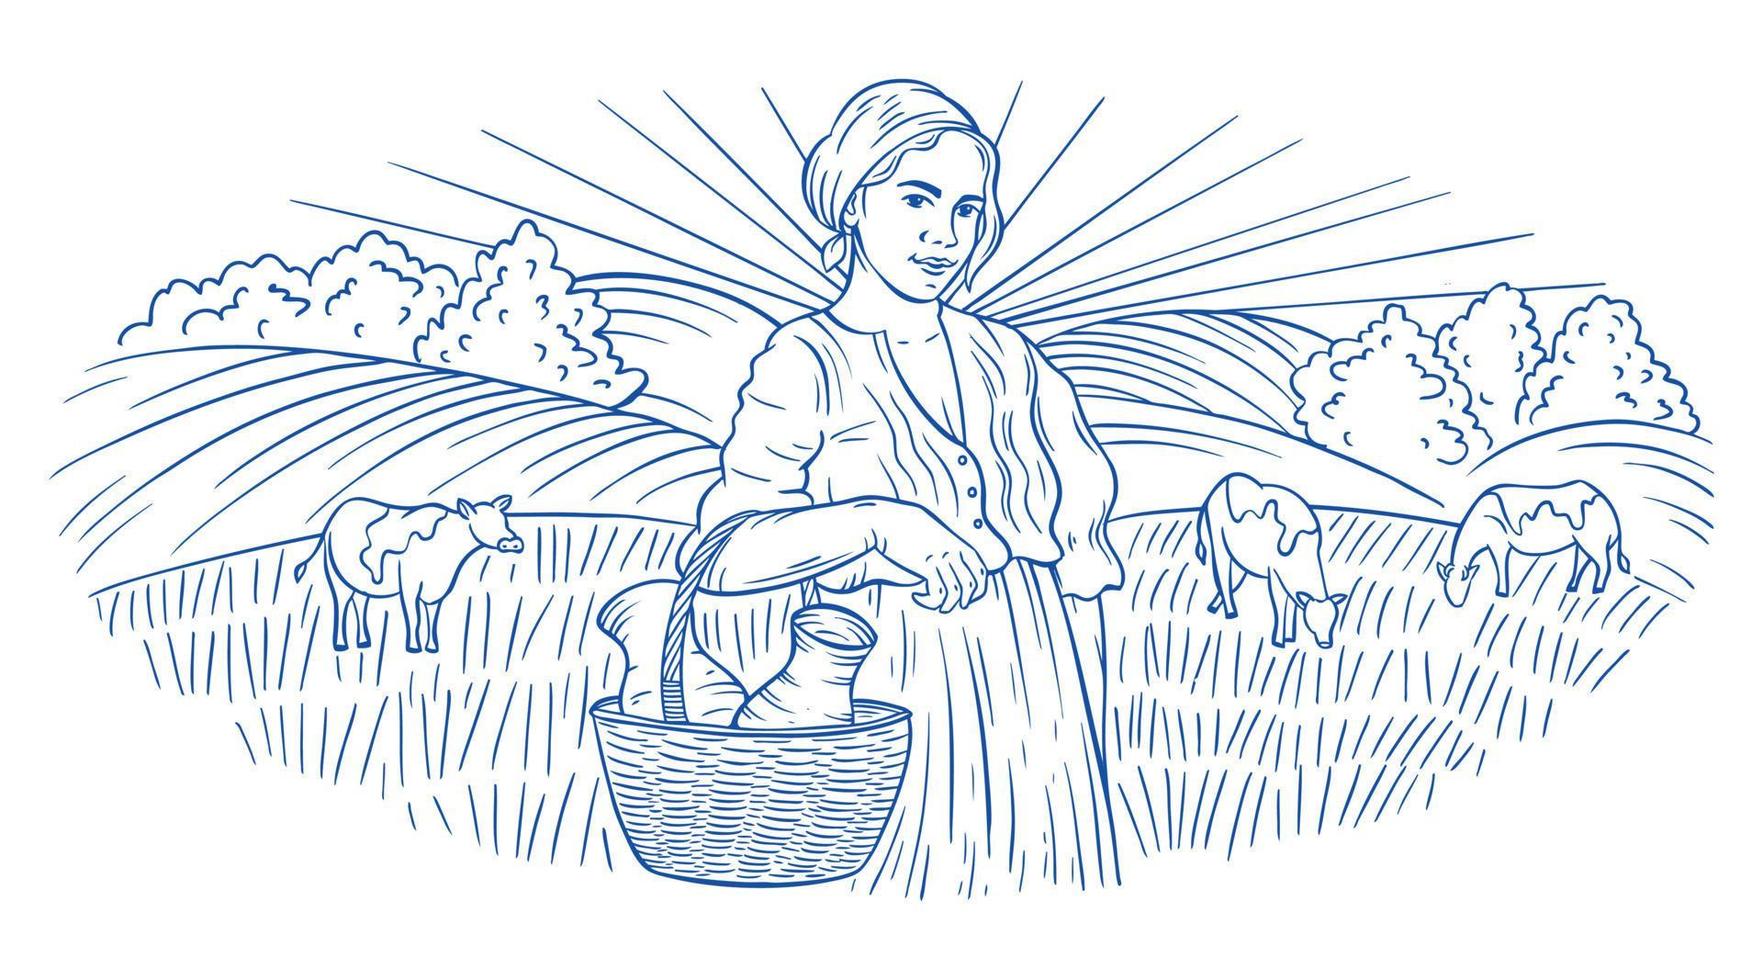 A village and a girl with fields and the sun. Rural landscape with a young woman and trees. The girl holds ears of wheat or rye. Hand engraving style vector